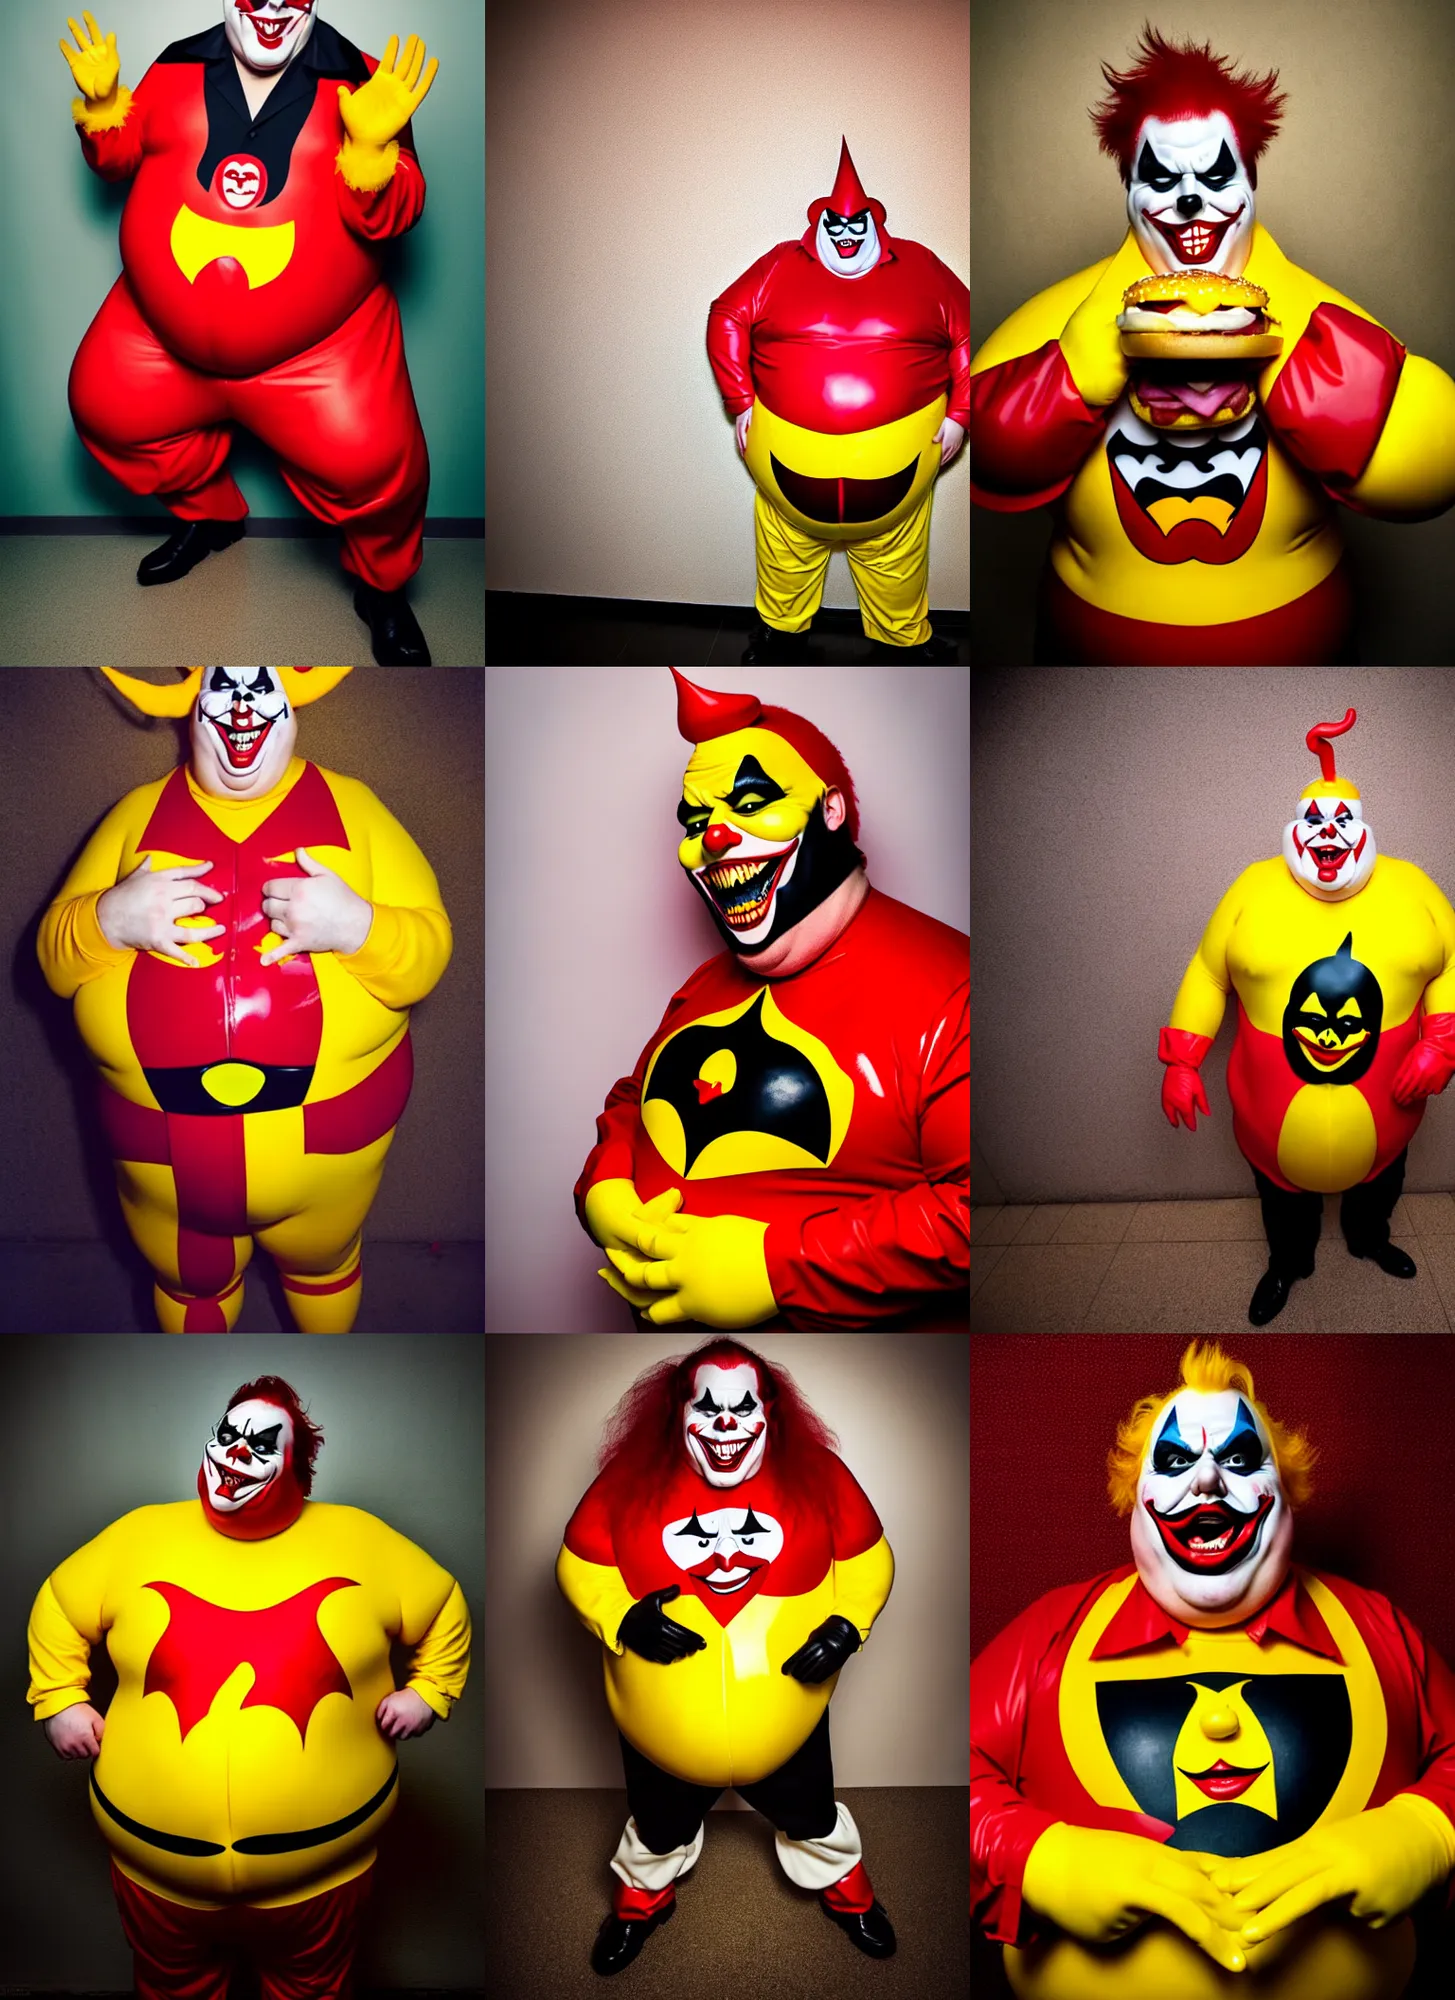 Prompt: dramatic wide angle lens portrait of a extremely fat sinister looking joker dressed in yellow and red rubber latex Ronald Macdonalds costume eating a Big Mac, red hair, a Macdonalds logo on his chest, photography inspired by Oleg Vdovenko